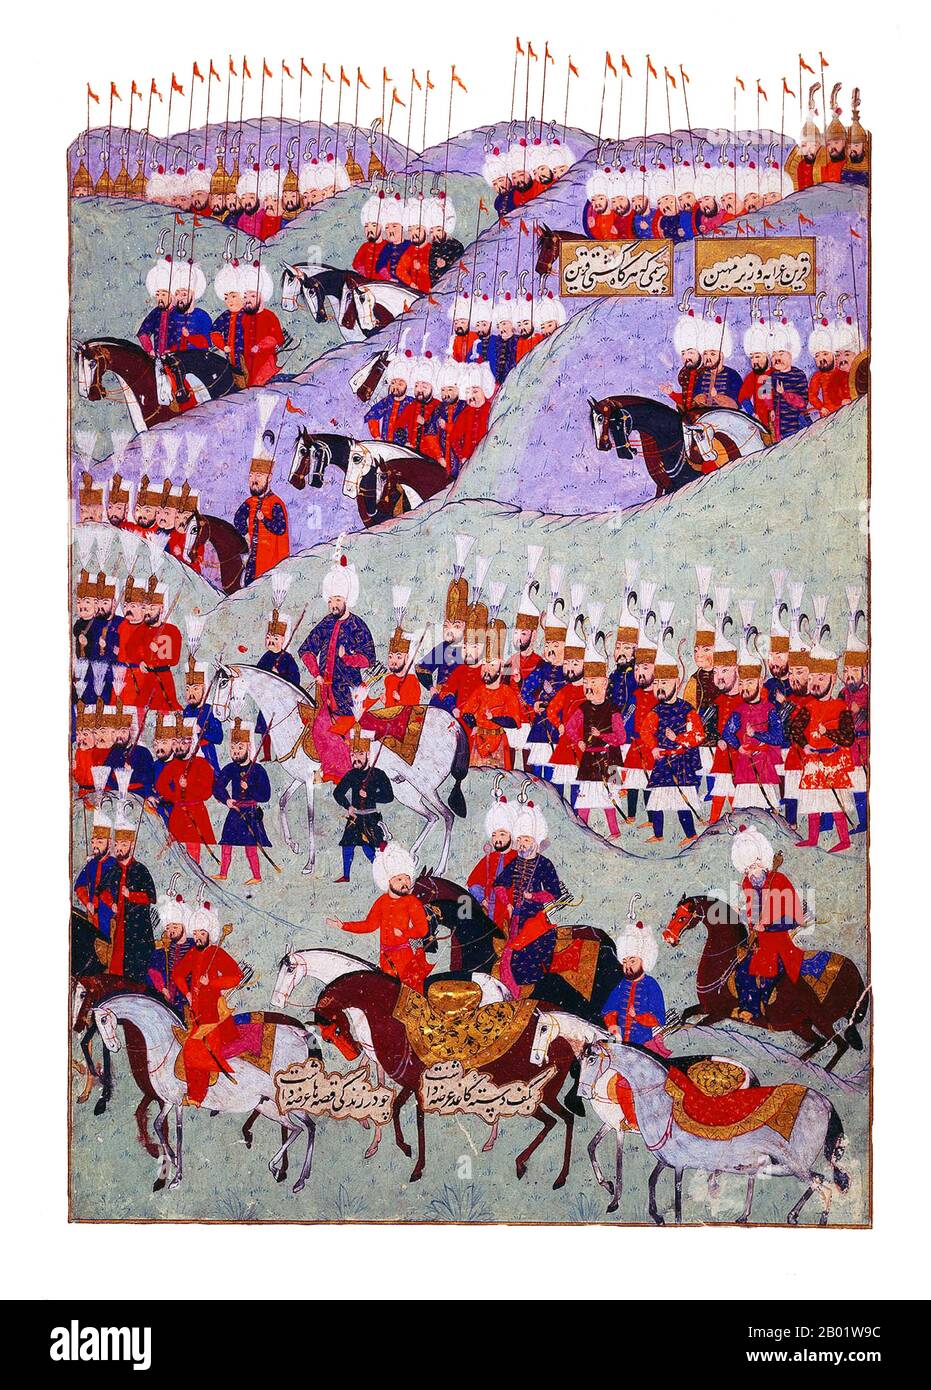 Turkey: The funeral of Sultan Suleyman the Magnificent (6 November 1494 - 6 September 1566). Ottoman miniature painting (right panel) by Matrakci Nasuh, 1579.  Sultan Suleyman/Suleiman I (r. 1520-1566), also known as 'Suleyman the Magnificent' and 'Suleyman the Lawmaker', was the 10th and longest reigning sultan of the Ottoman empire. He personally led his armies to conquer Transylvania, the Caspian, much of the Middle East and the Maghreb.  Suleyman introduced sweeping reforms in Turkish legislation, education, taxation and criminal law, and was highly respected as a poet and a goldsmith. Stock Photo